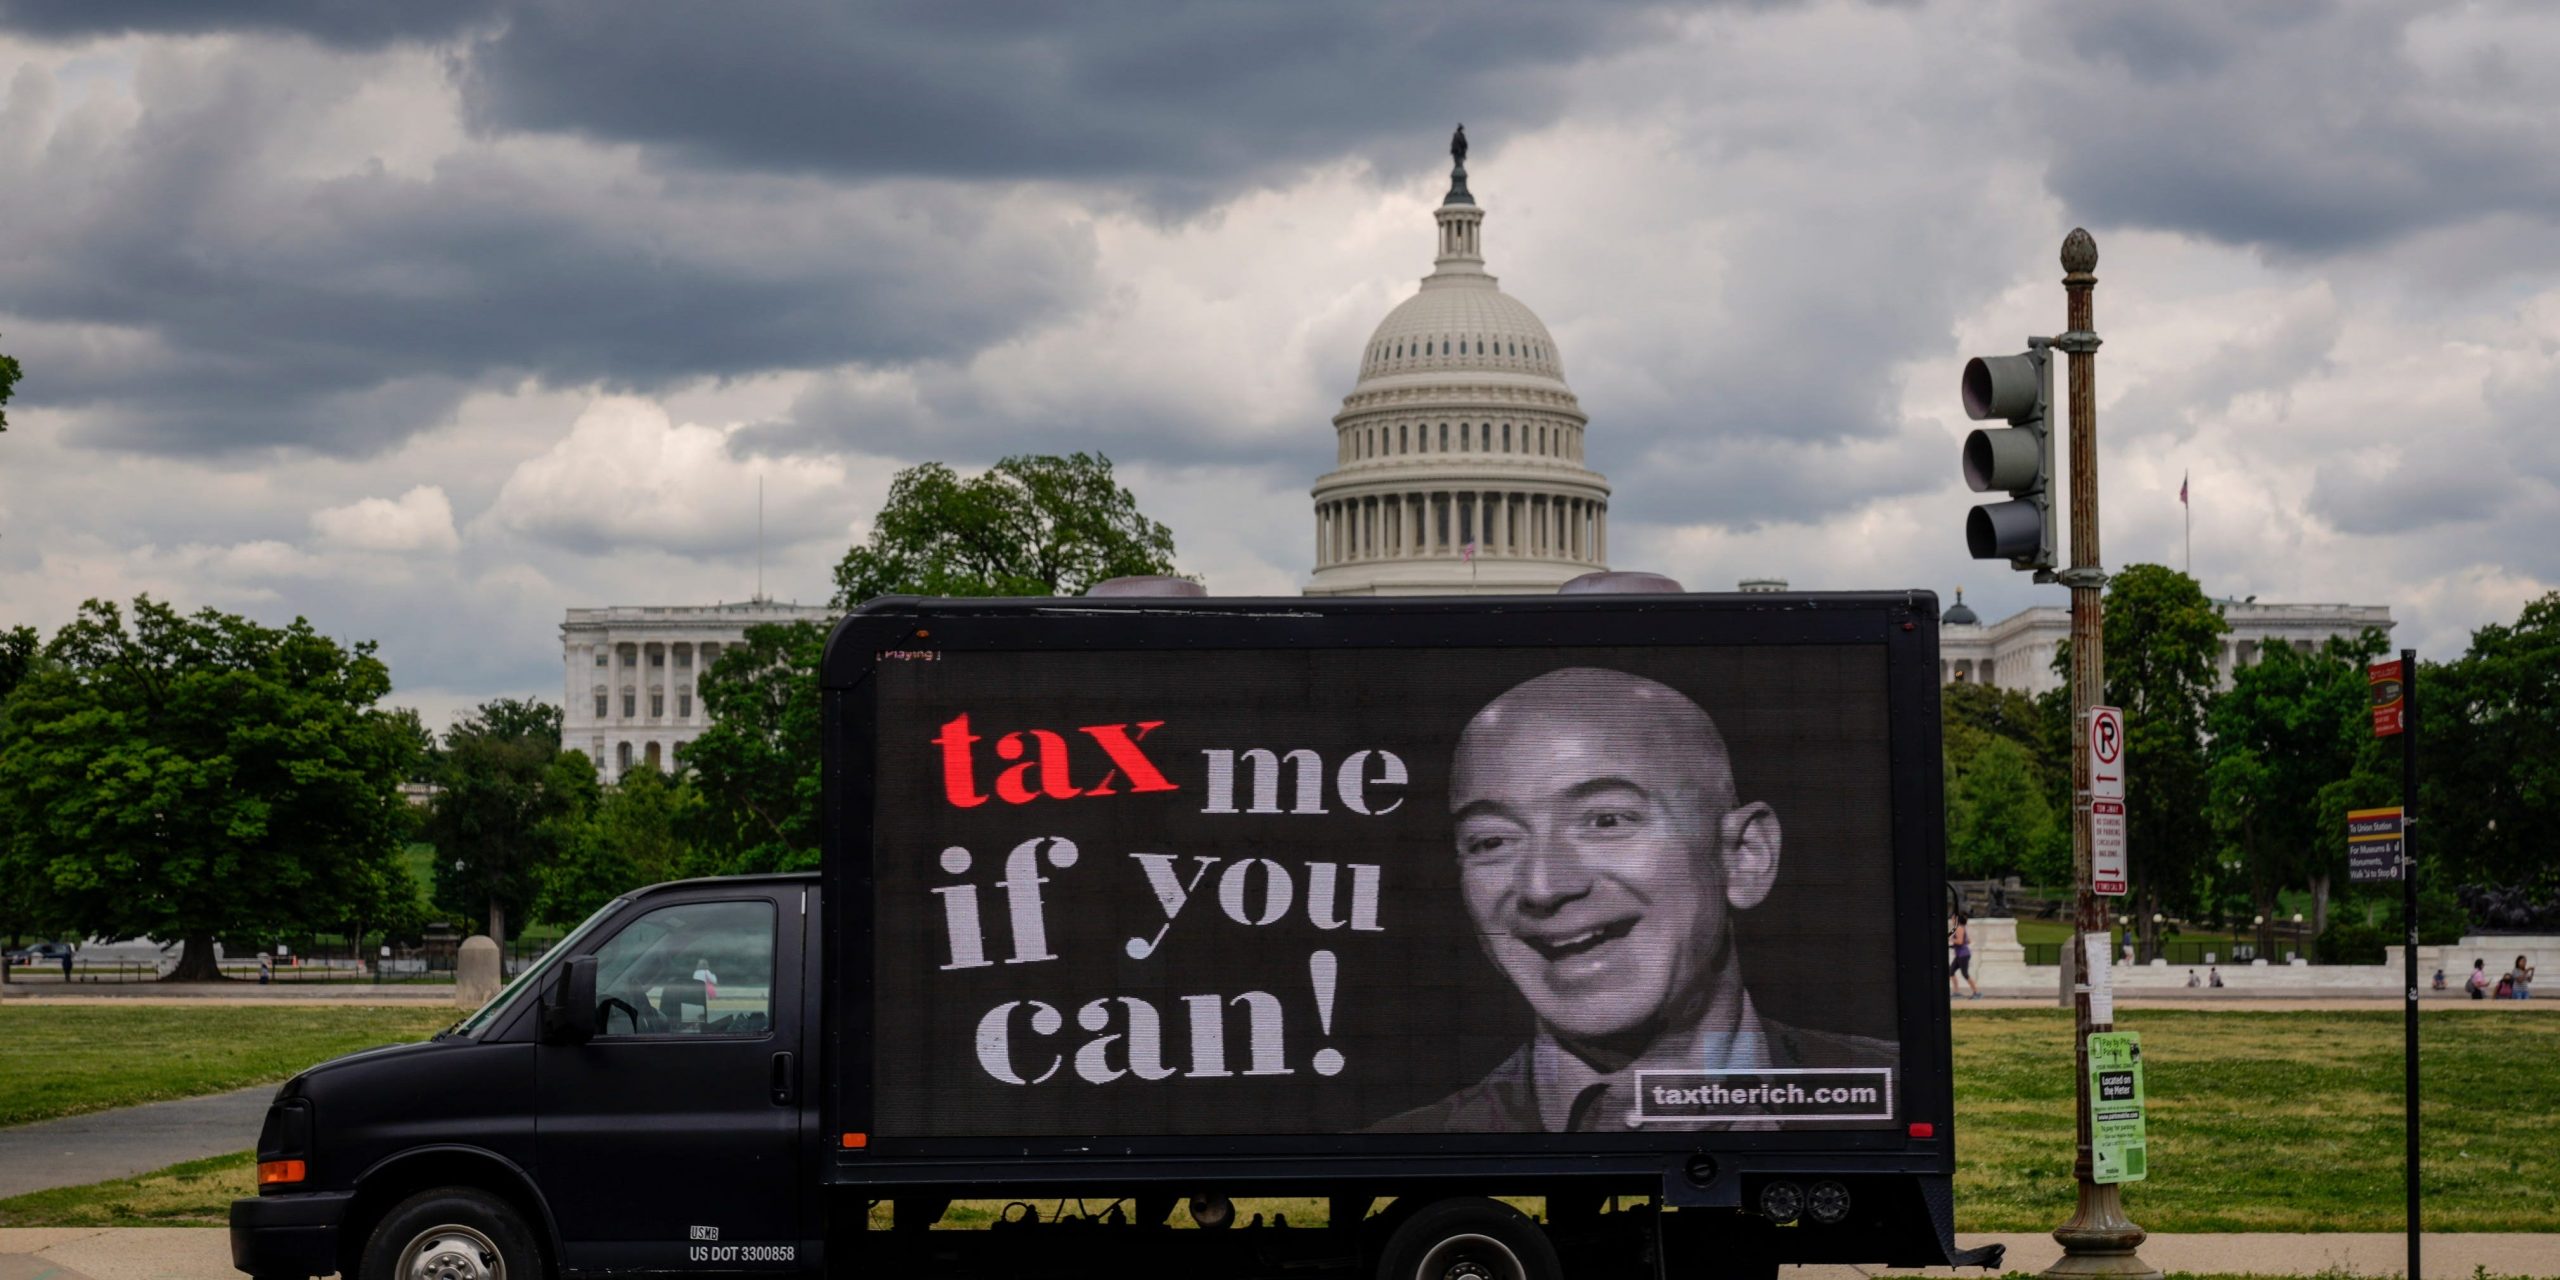 A mobile billboard calling for higher taxes on the ultra-wealthy depicts an image of billionaire businessman Jeff Bezos, near the U.S. Capitol on May 17, 2021 in Washington, DC. Organized by the group "Patriotic Millionaires," the mobile billboards are rolling through Washington, DC and New York City on Monday to mark Tax Day, calling for higher taxes for wealthy Americans.